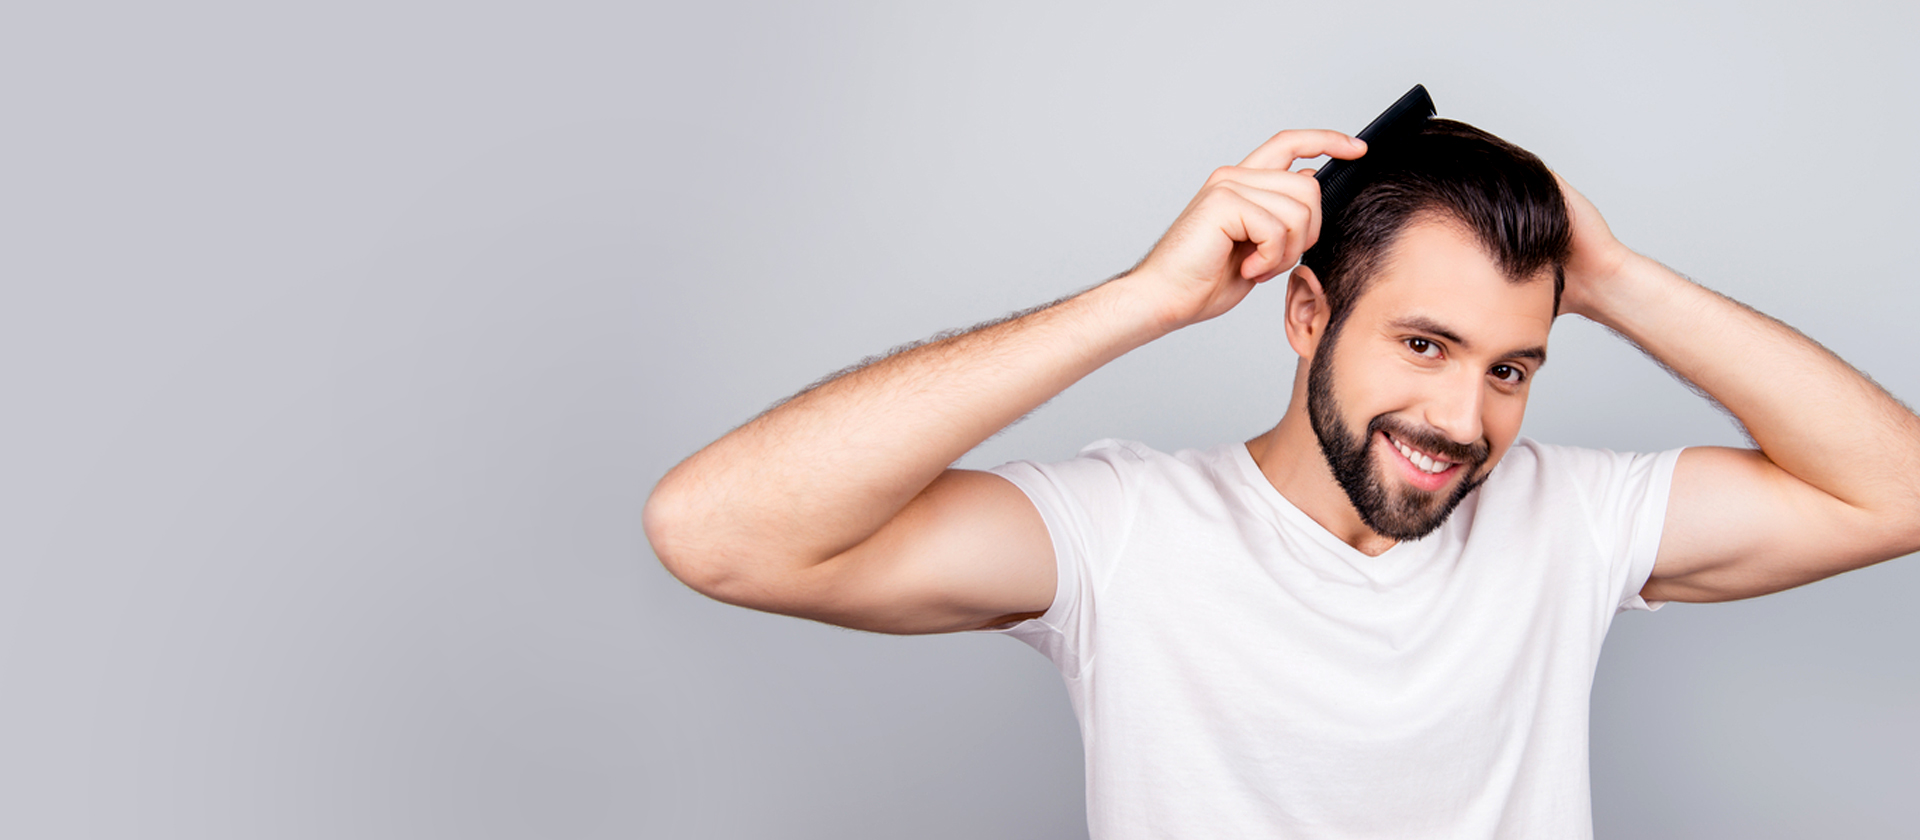  How long does it take for the hair grafts to set after a hair transplant?